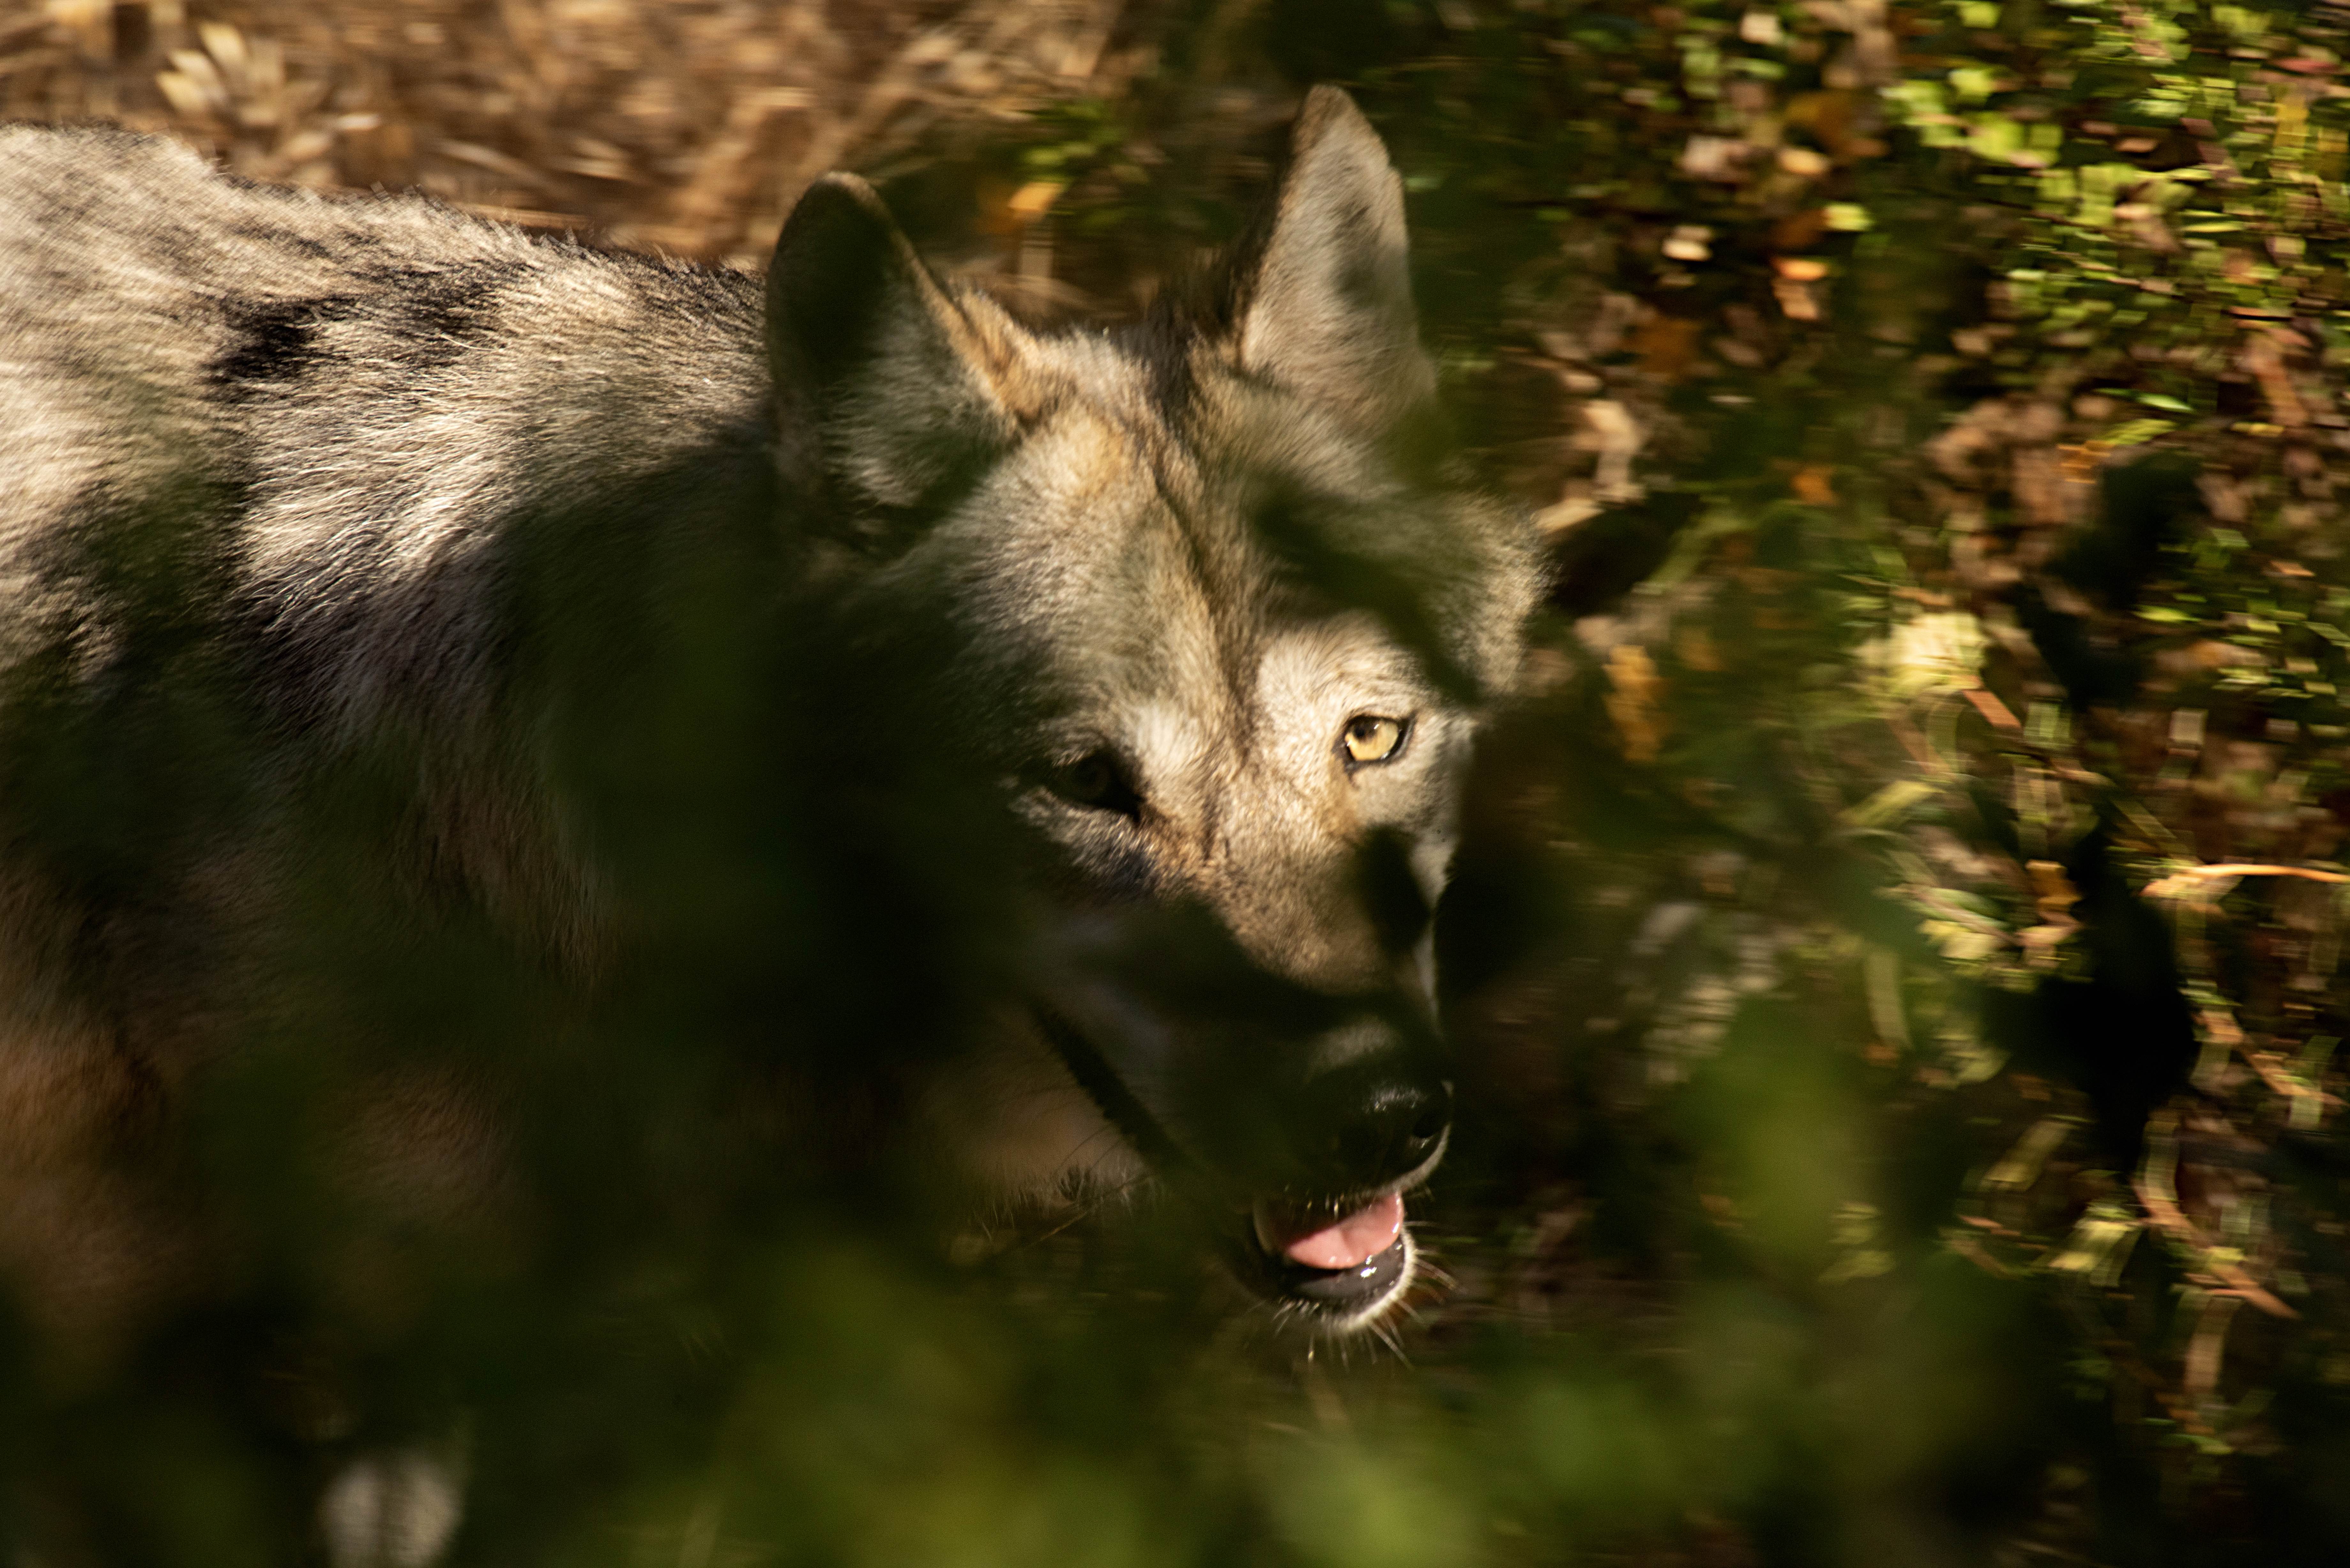 A gray wolf at the Oakland Zoo. Photo by Gregory Urquiaga / UC Davis